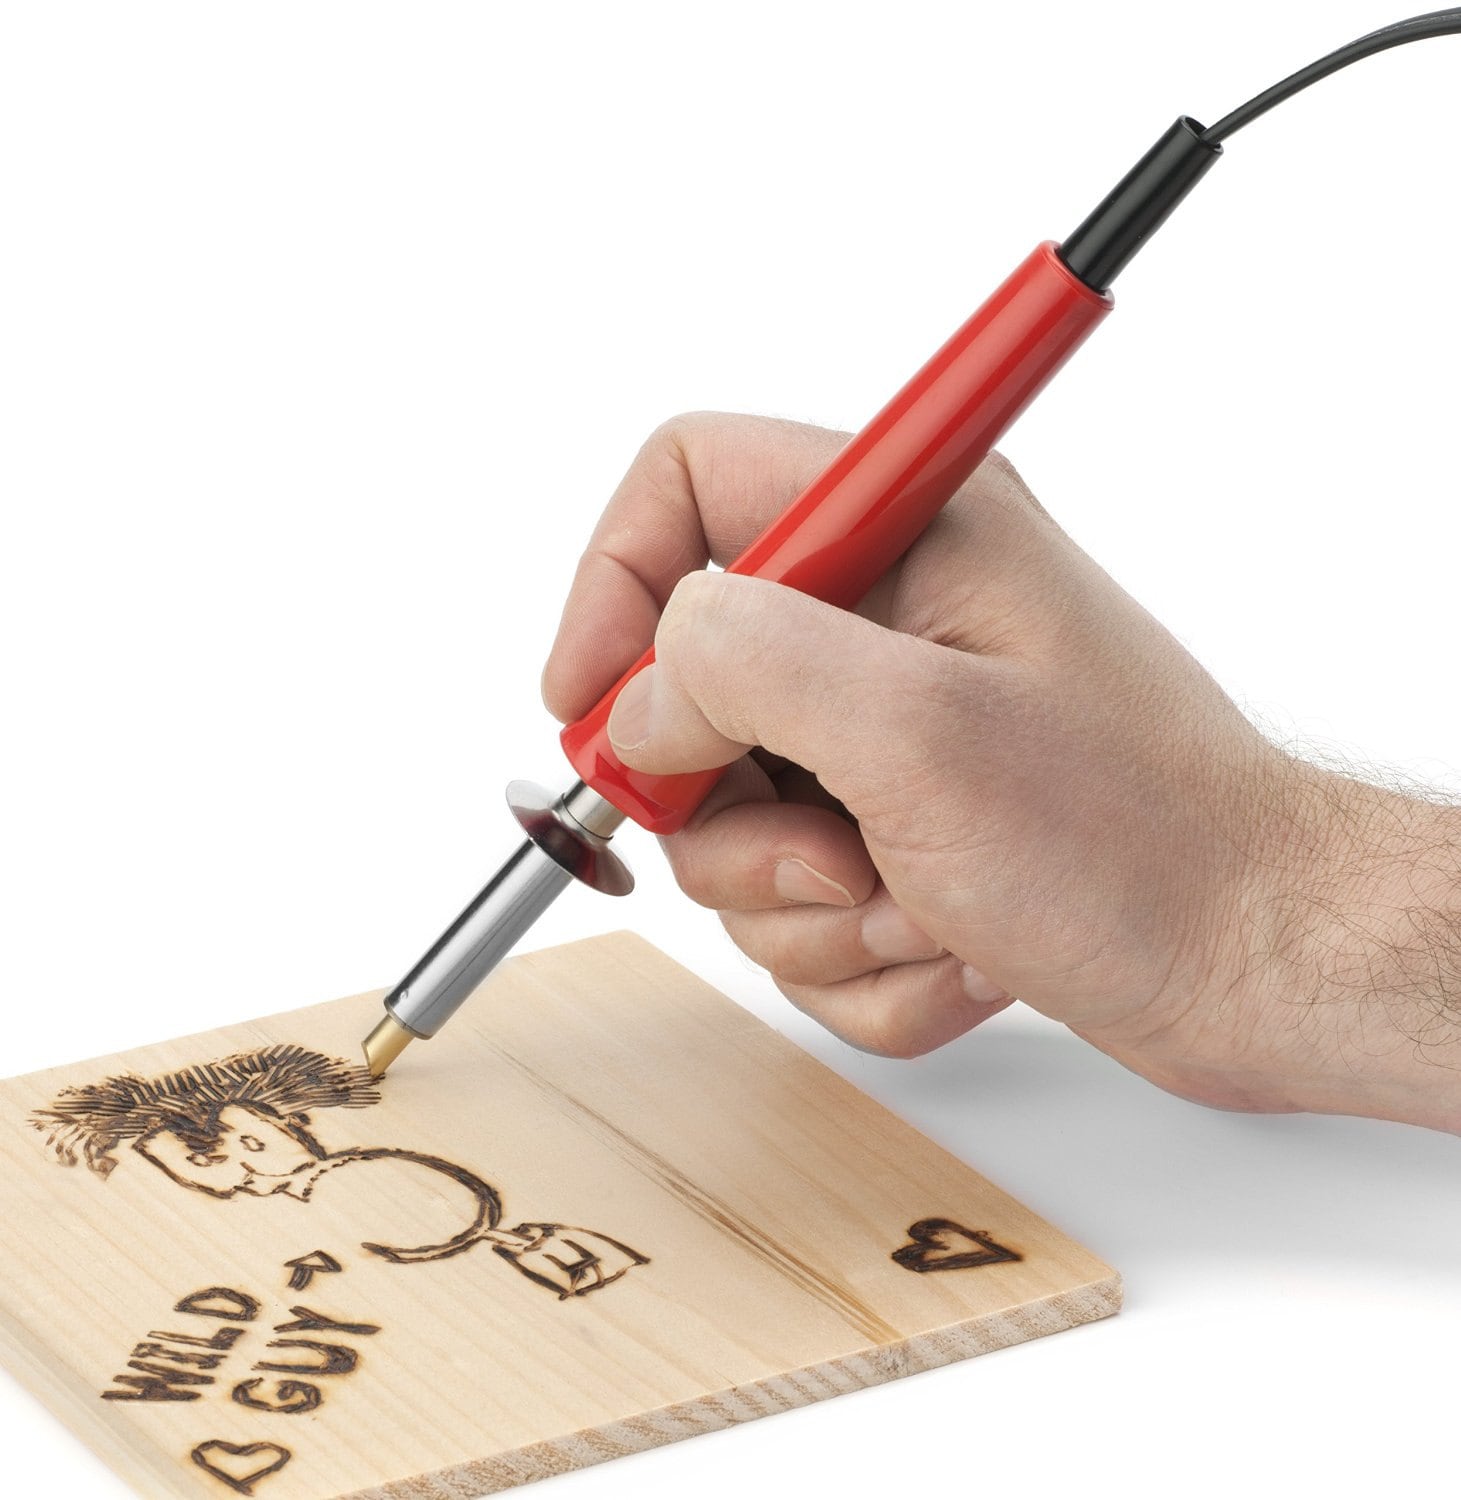 Wire-Tip Wood Burning Kit - A Tool Review, Part 1